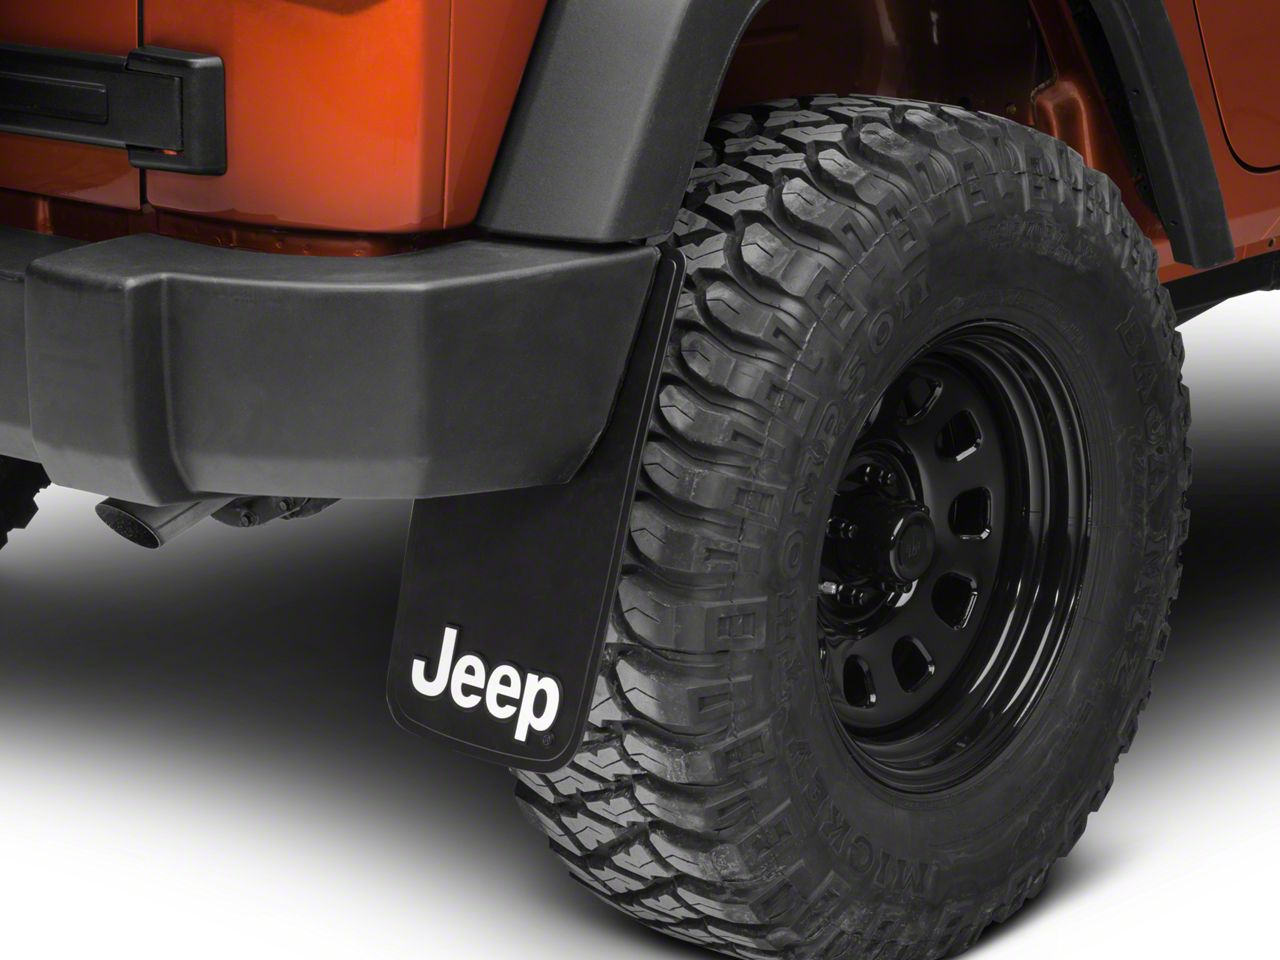 Jeep Mud Flaps & Guards 1987-1995 YJ